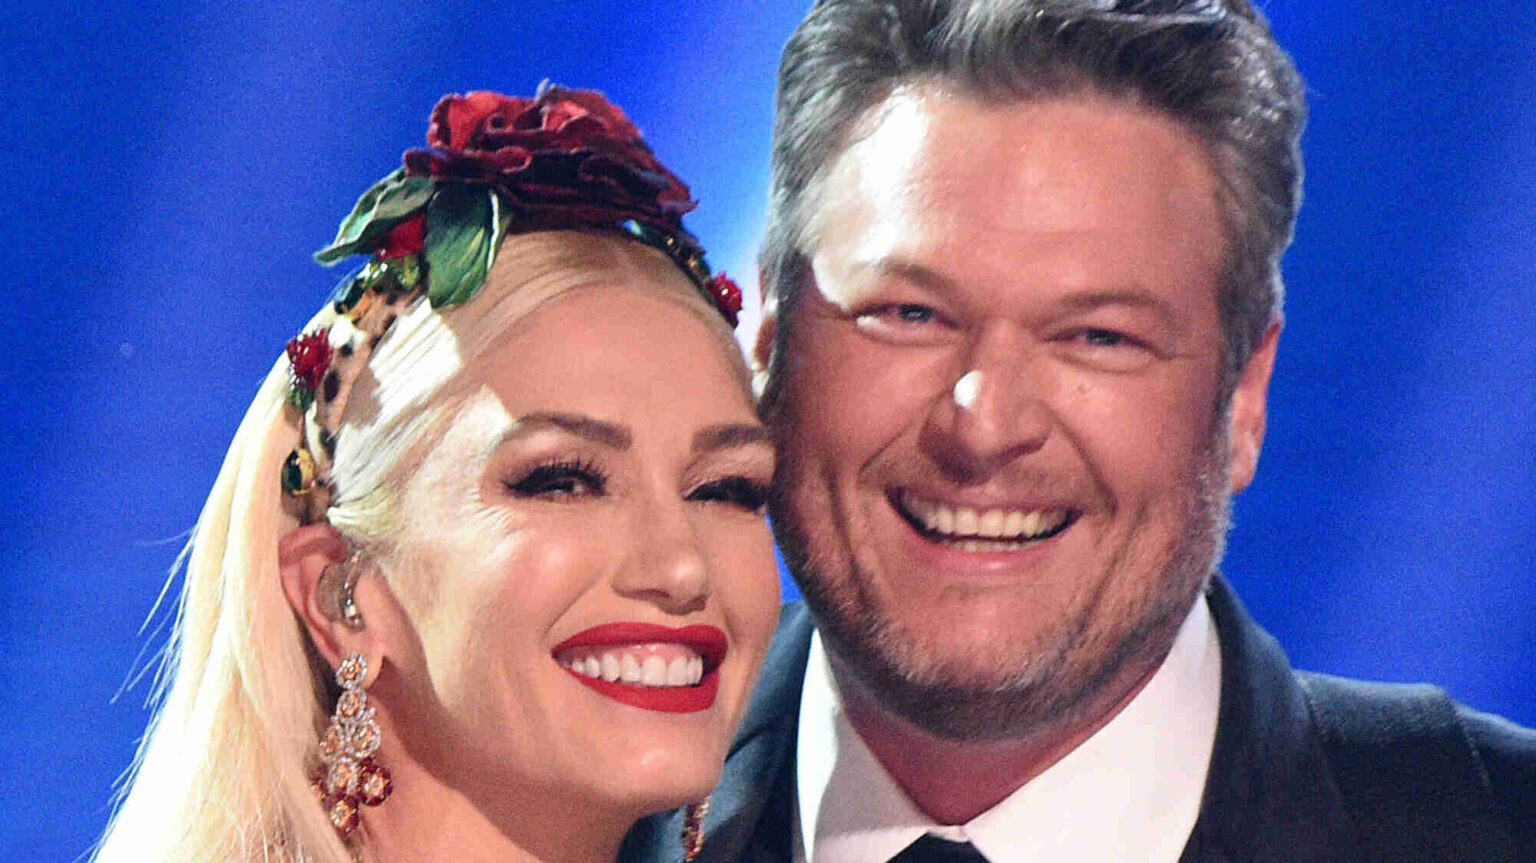 It’s official, y’all! Gwen Stefani and Blake Shelton are officially married. See their stunning wedding and more here.